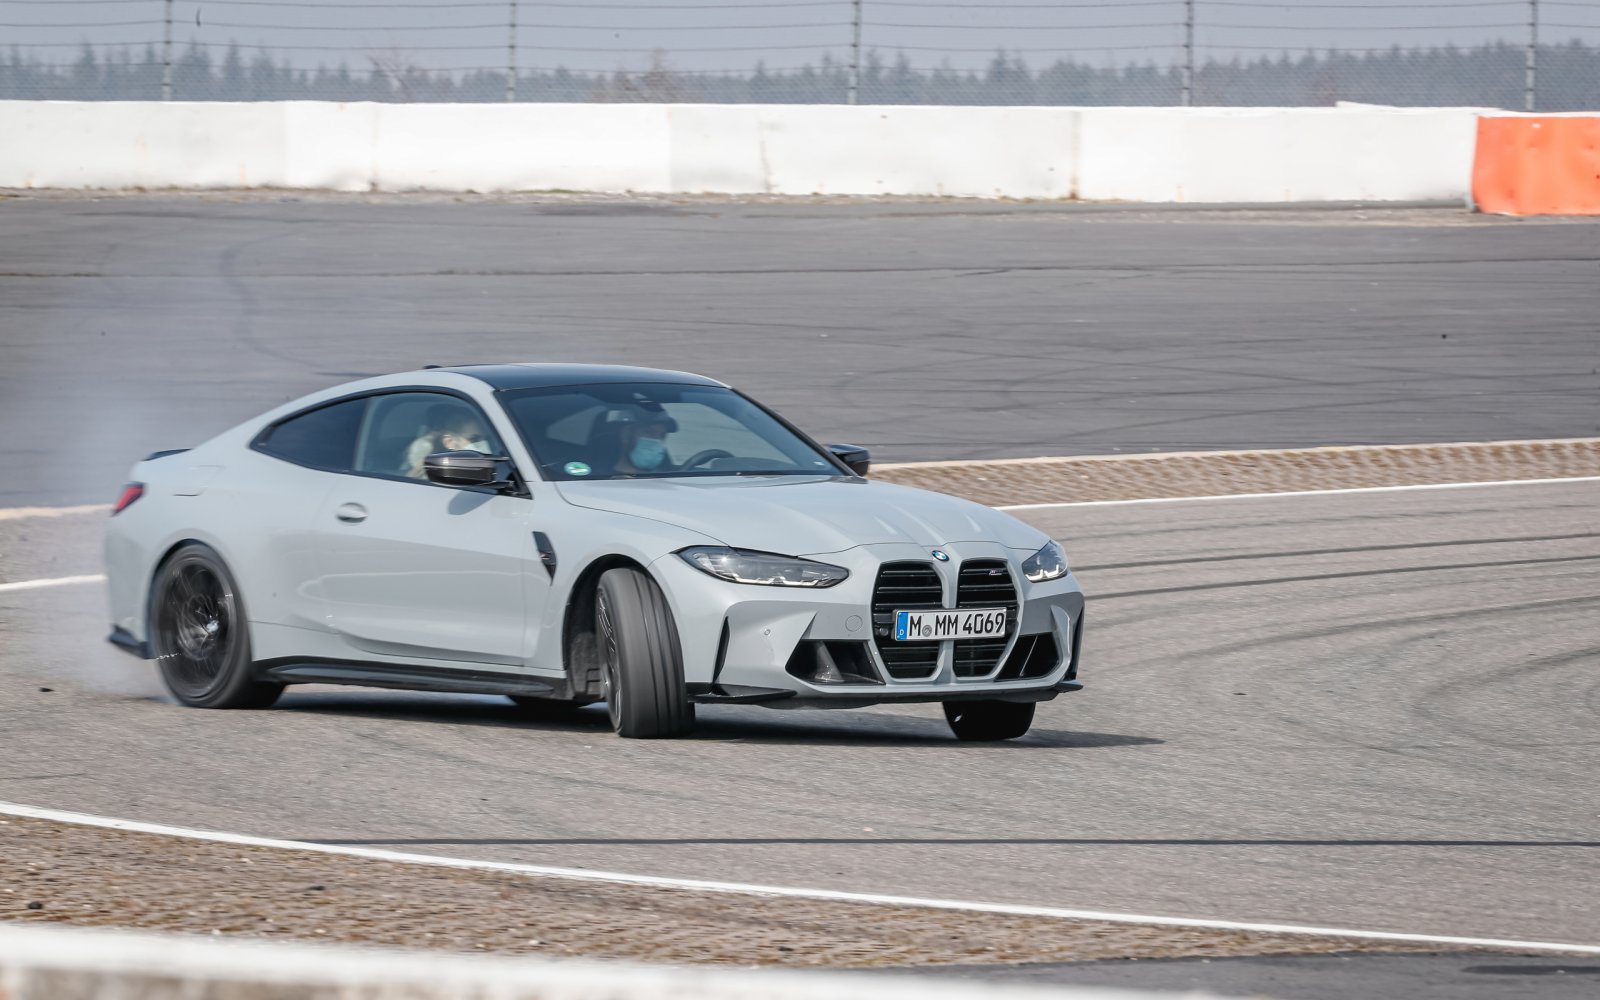 Test: This is how the BMW M4 tries to knock the Porsche 911 off the throne